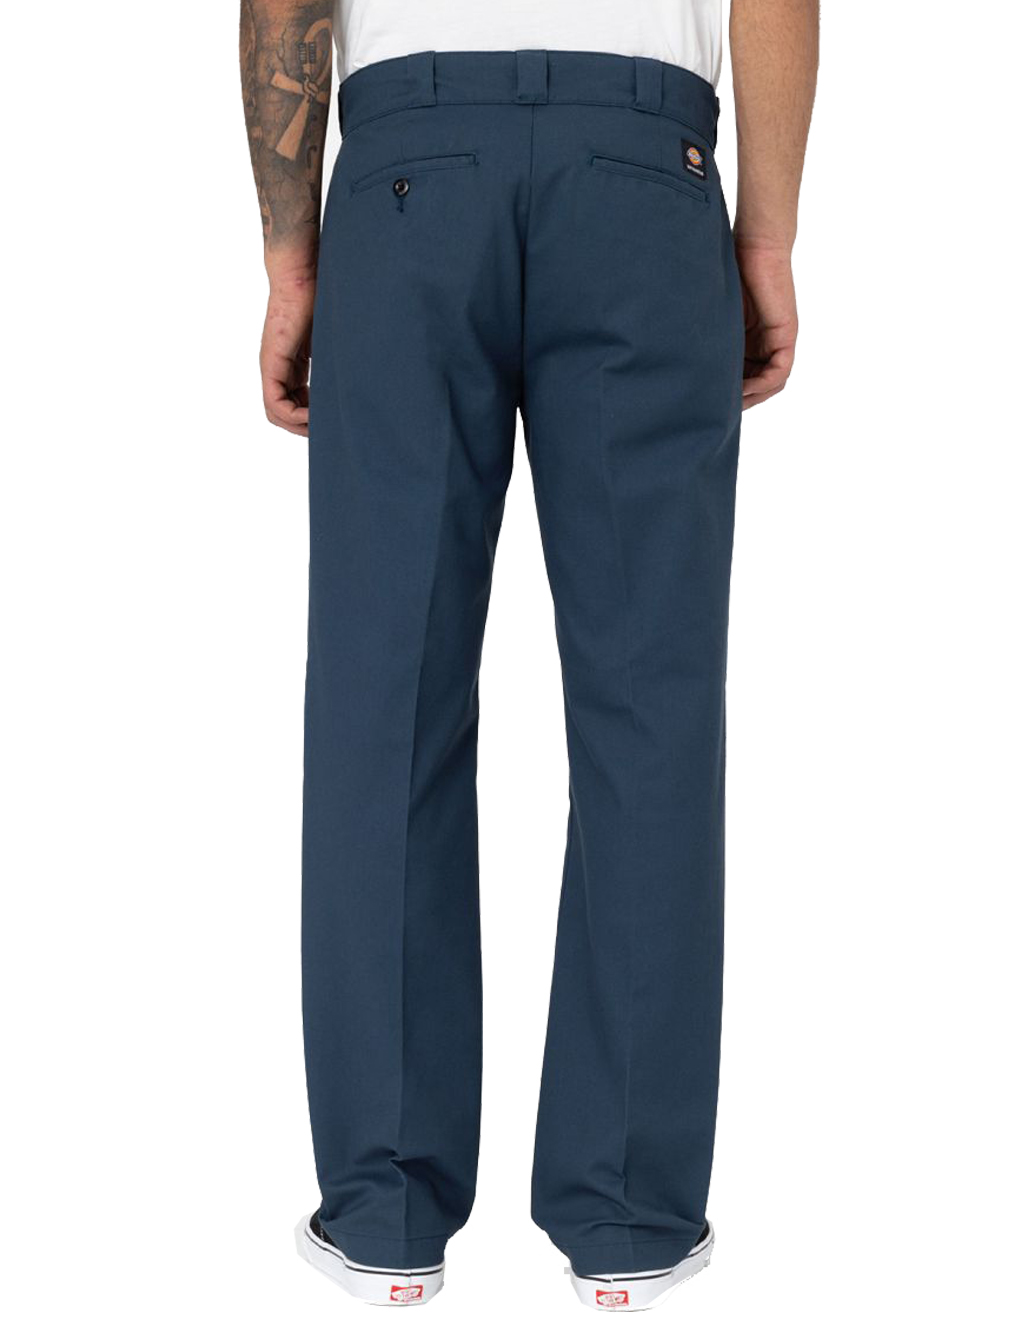 Dickies - O-Dog 874 Traditional Work Pant - Navy Blue